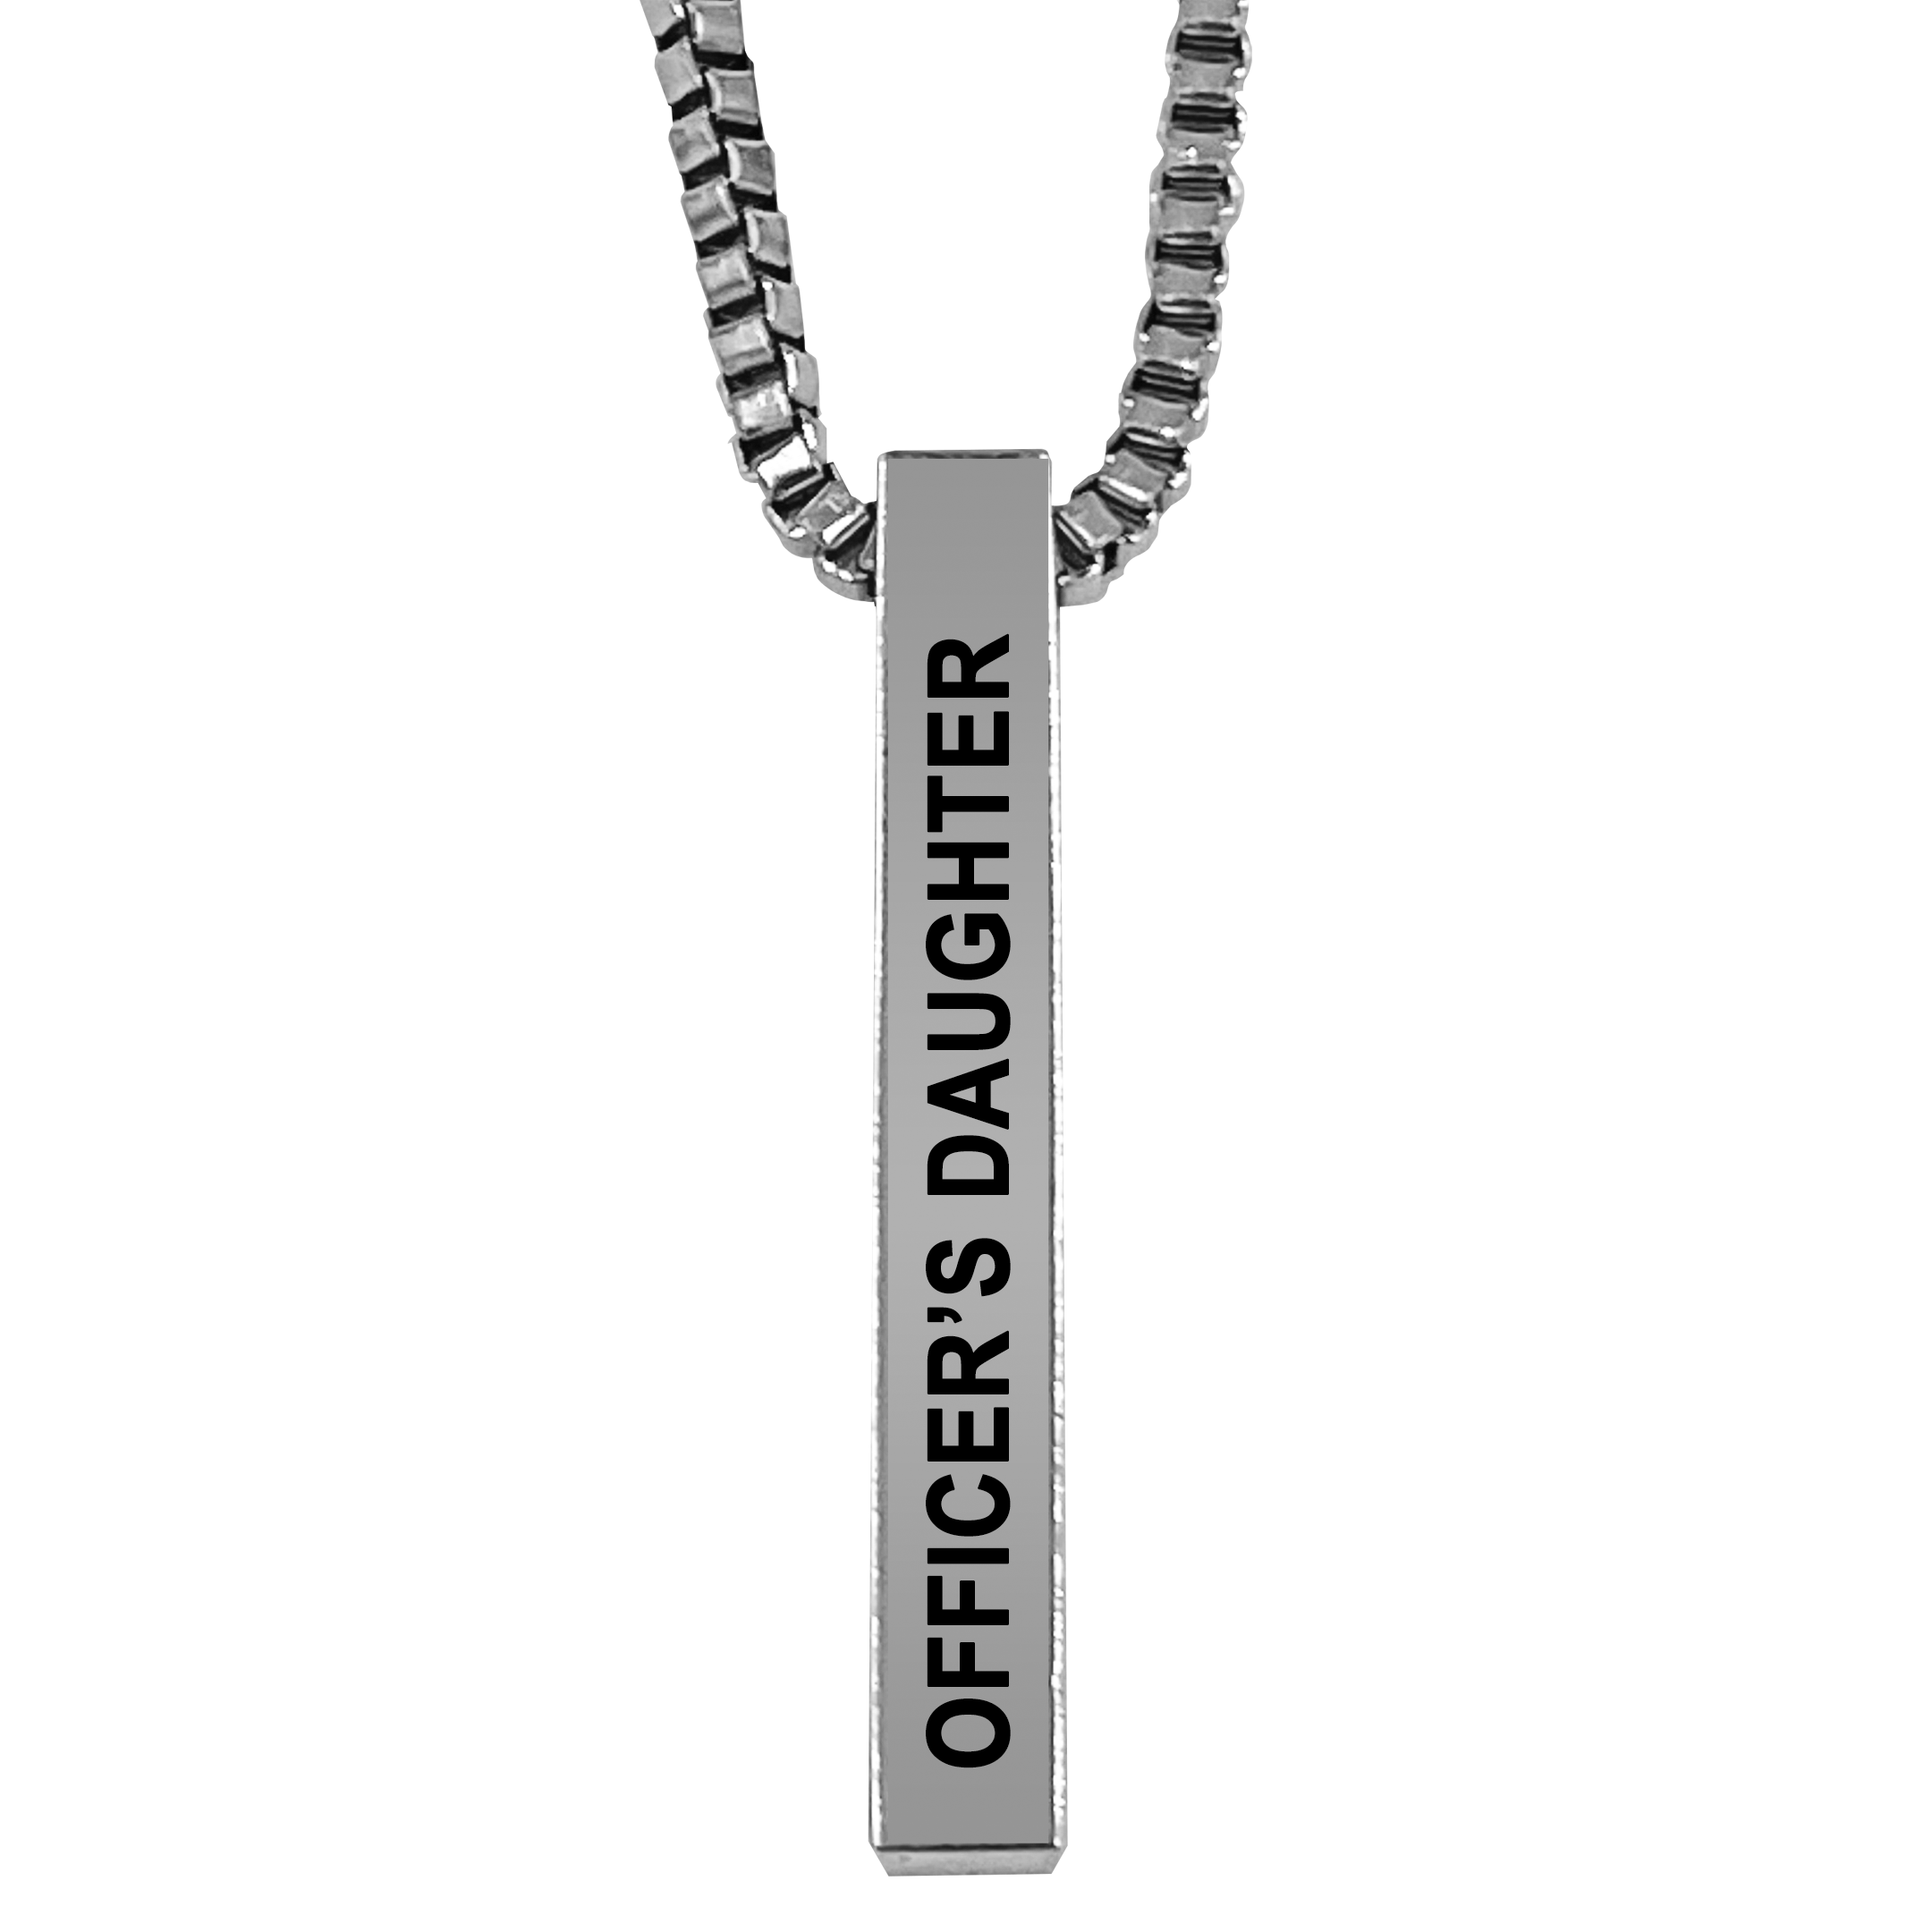 Officer's Daughter Silver Plated Pillar Bar Pendant Necklace Gift Mother's Day Christmas Holiday Anniversary Police Officer First Responder Law Enforcement